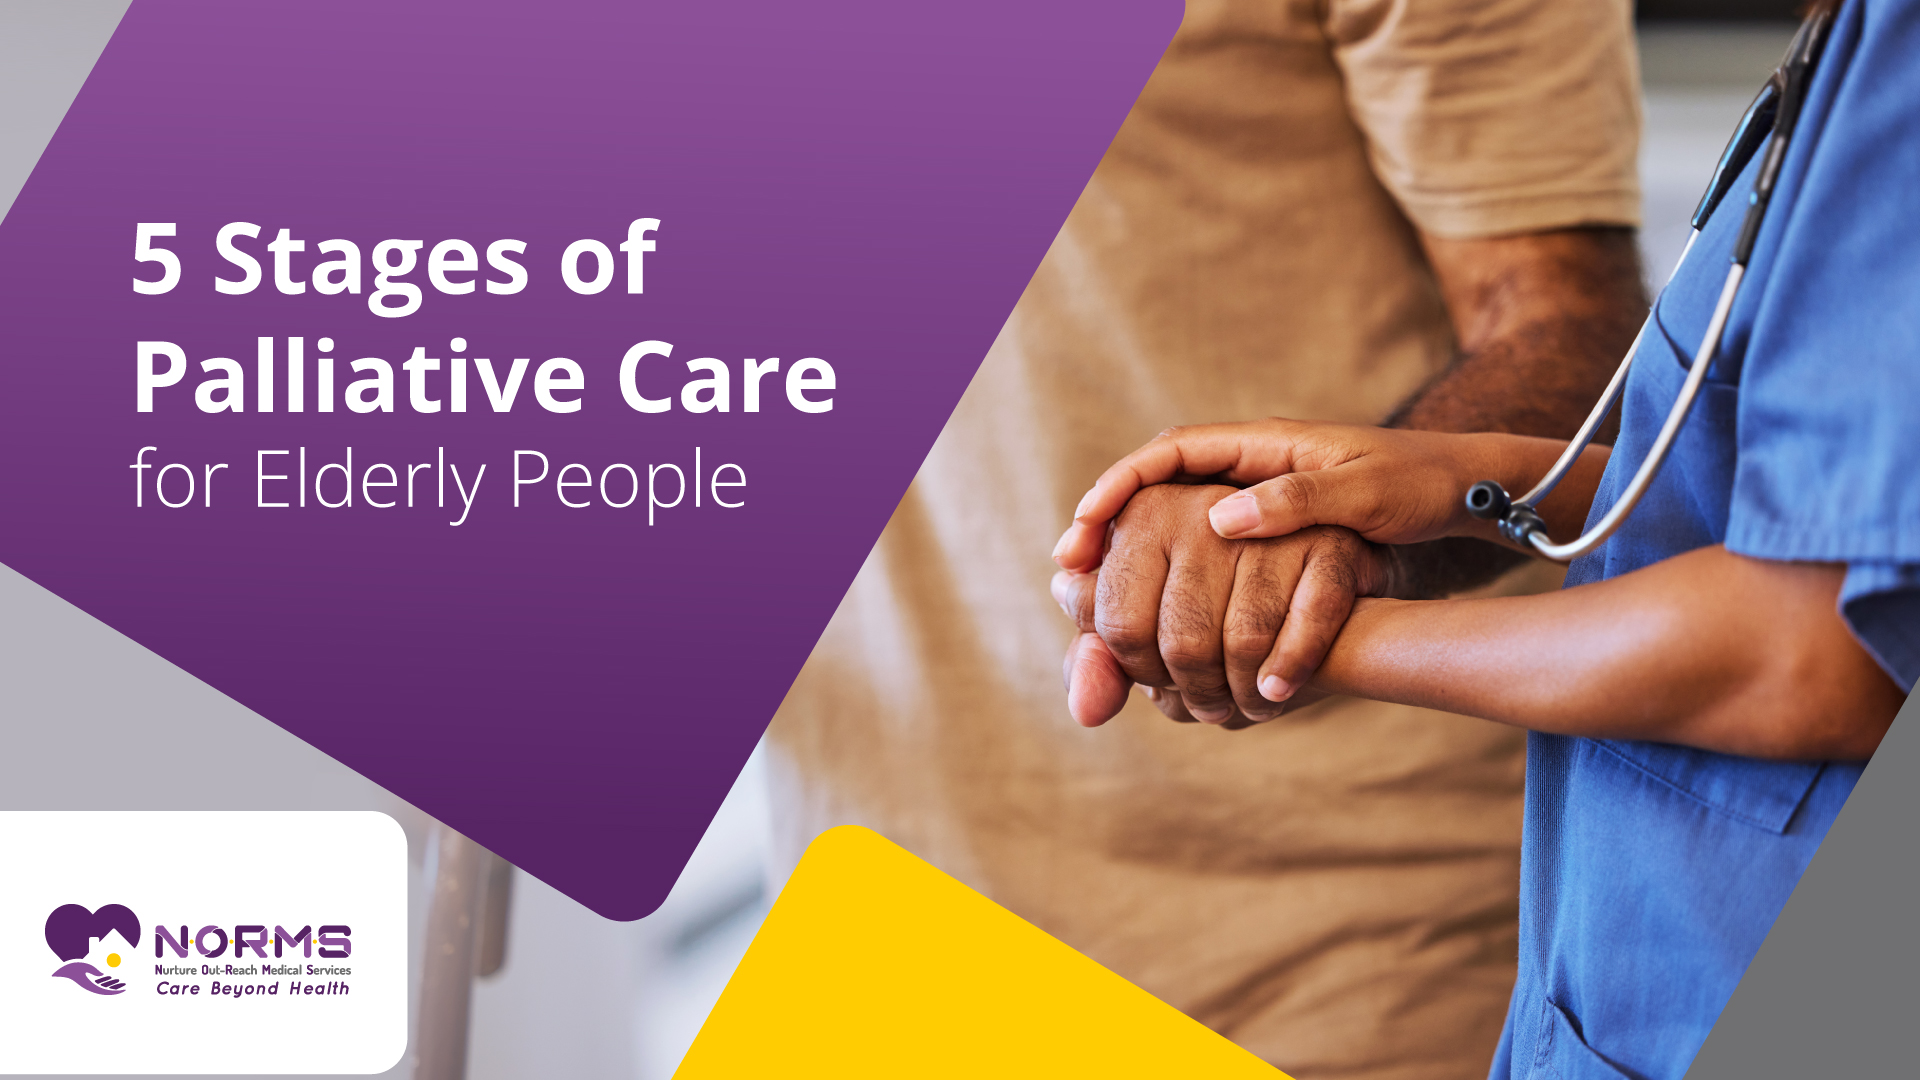 The 5 Stages of Palliative Care for Elderly Patients